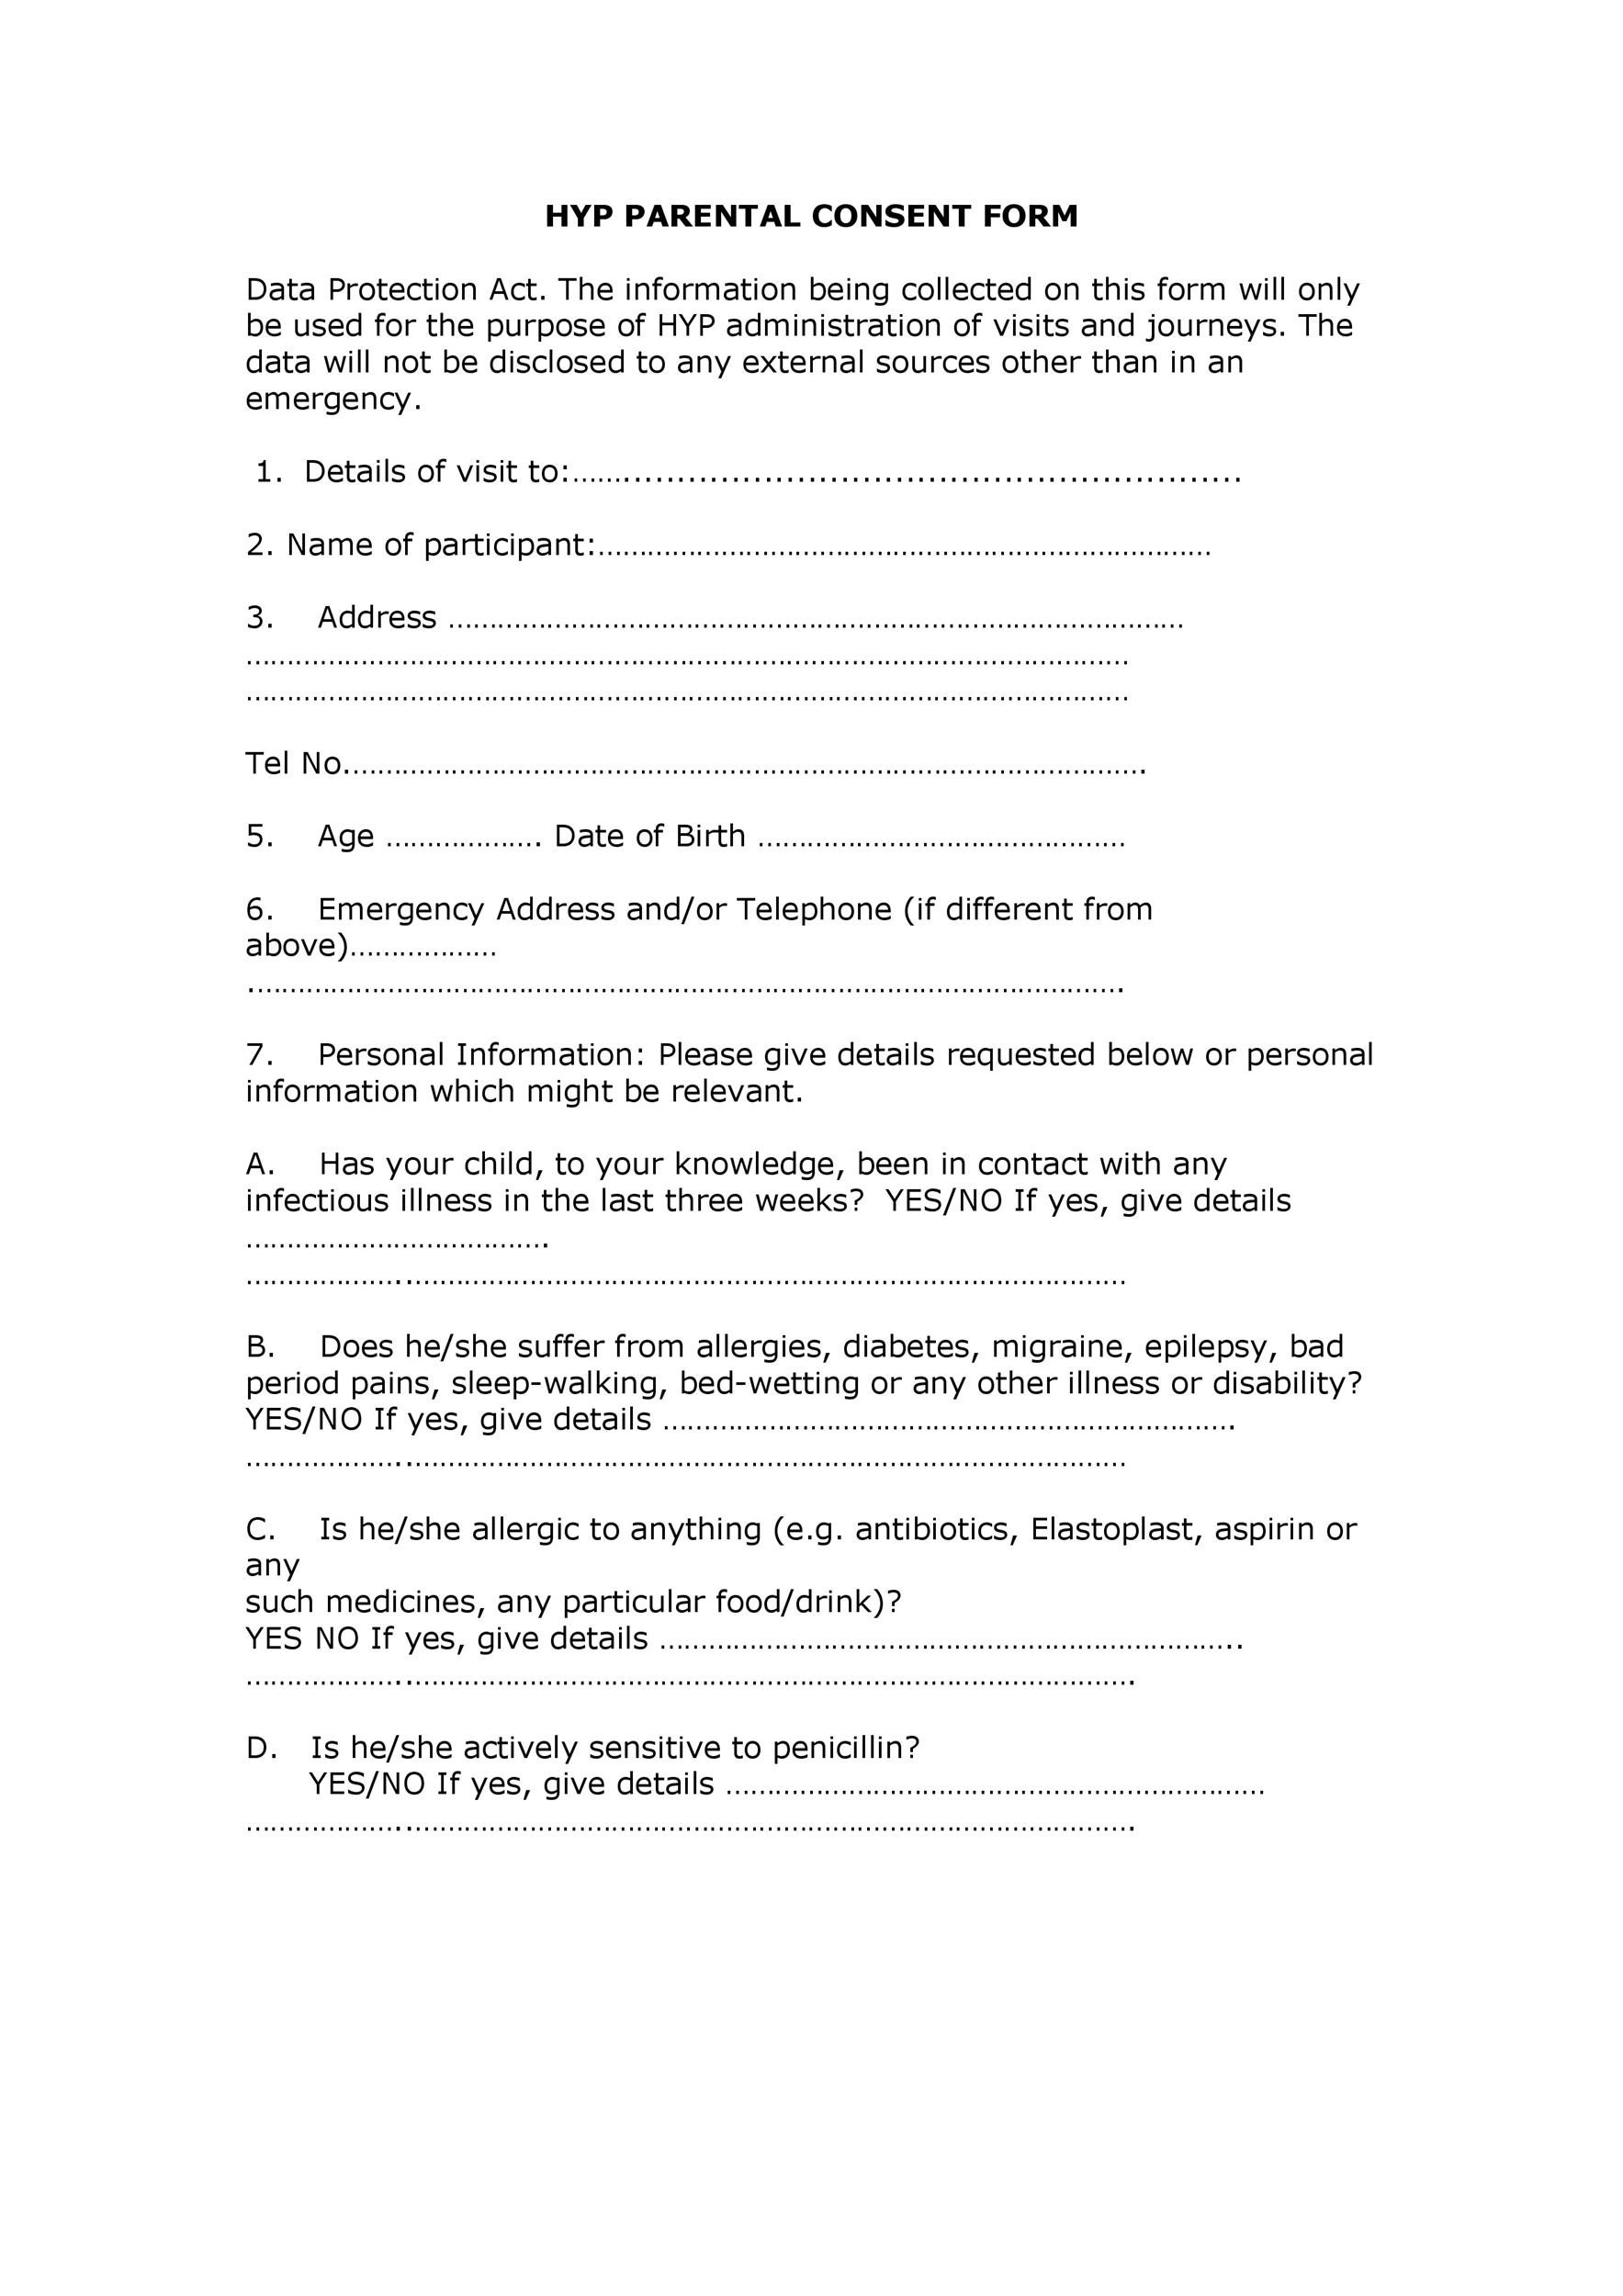 Free parental consent form template 41